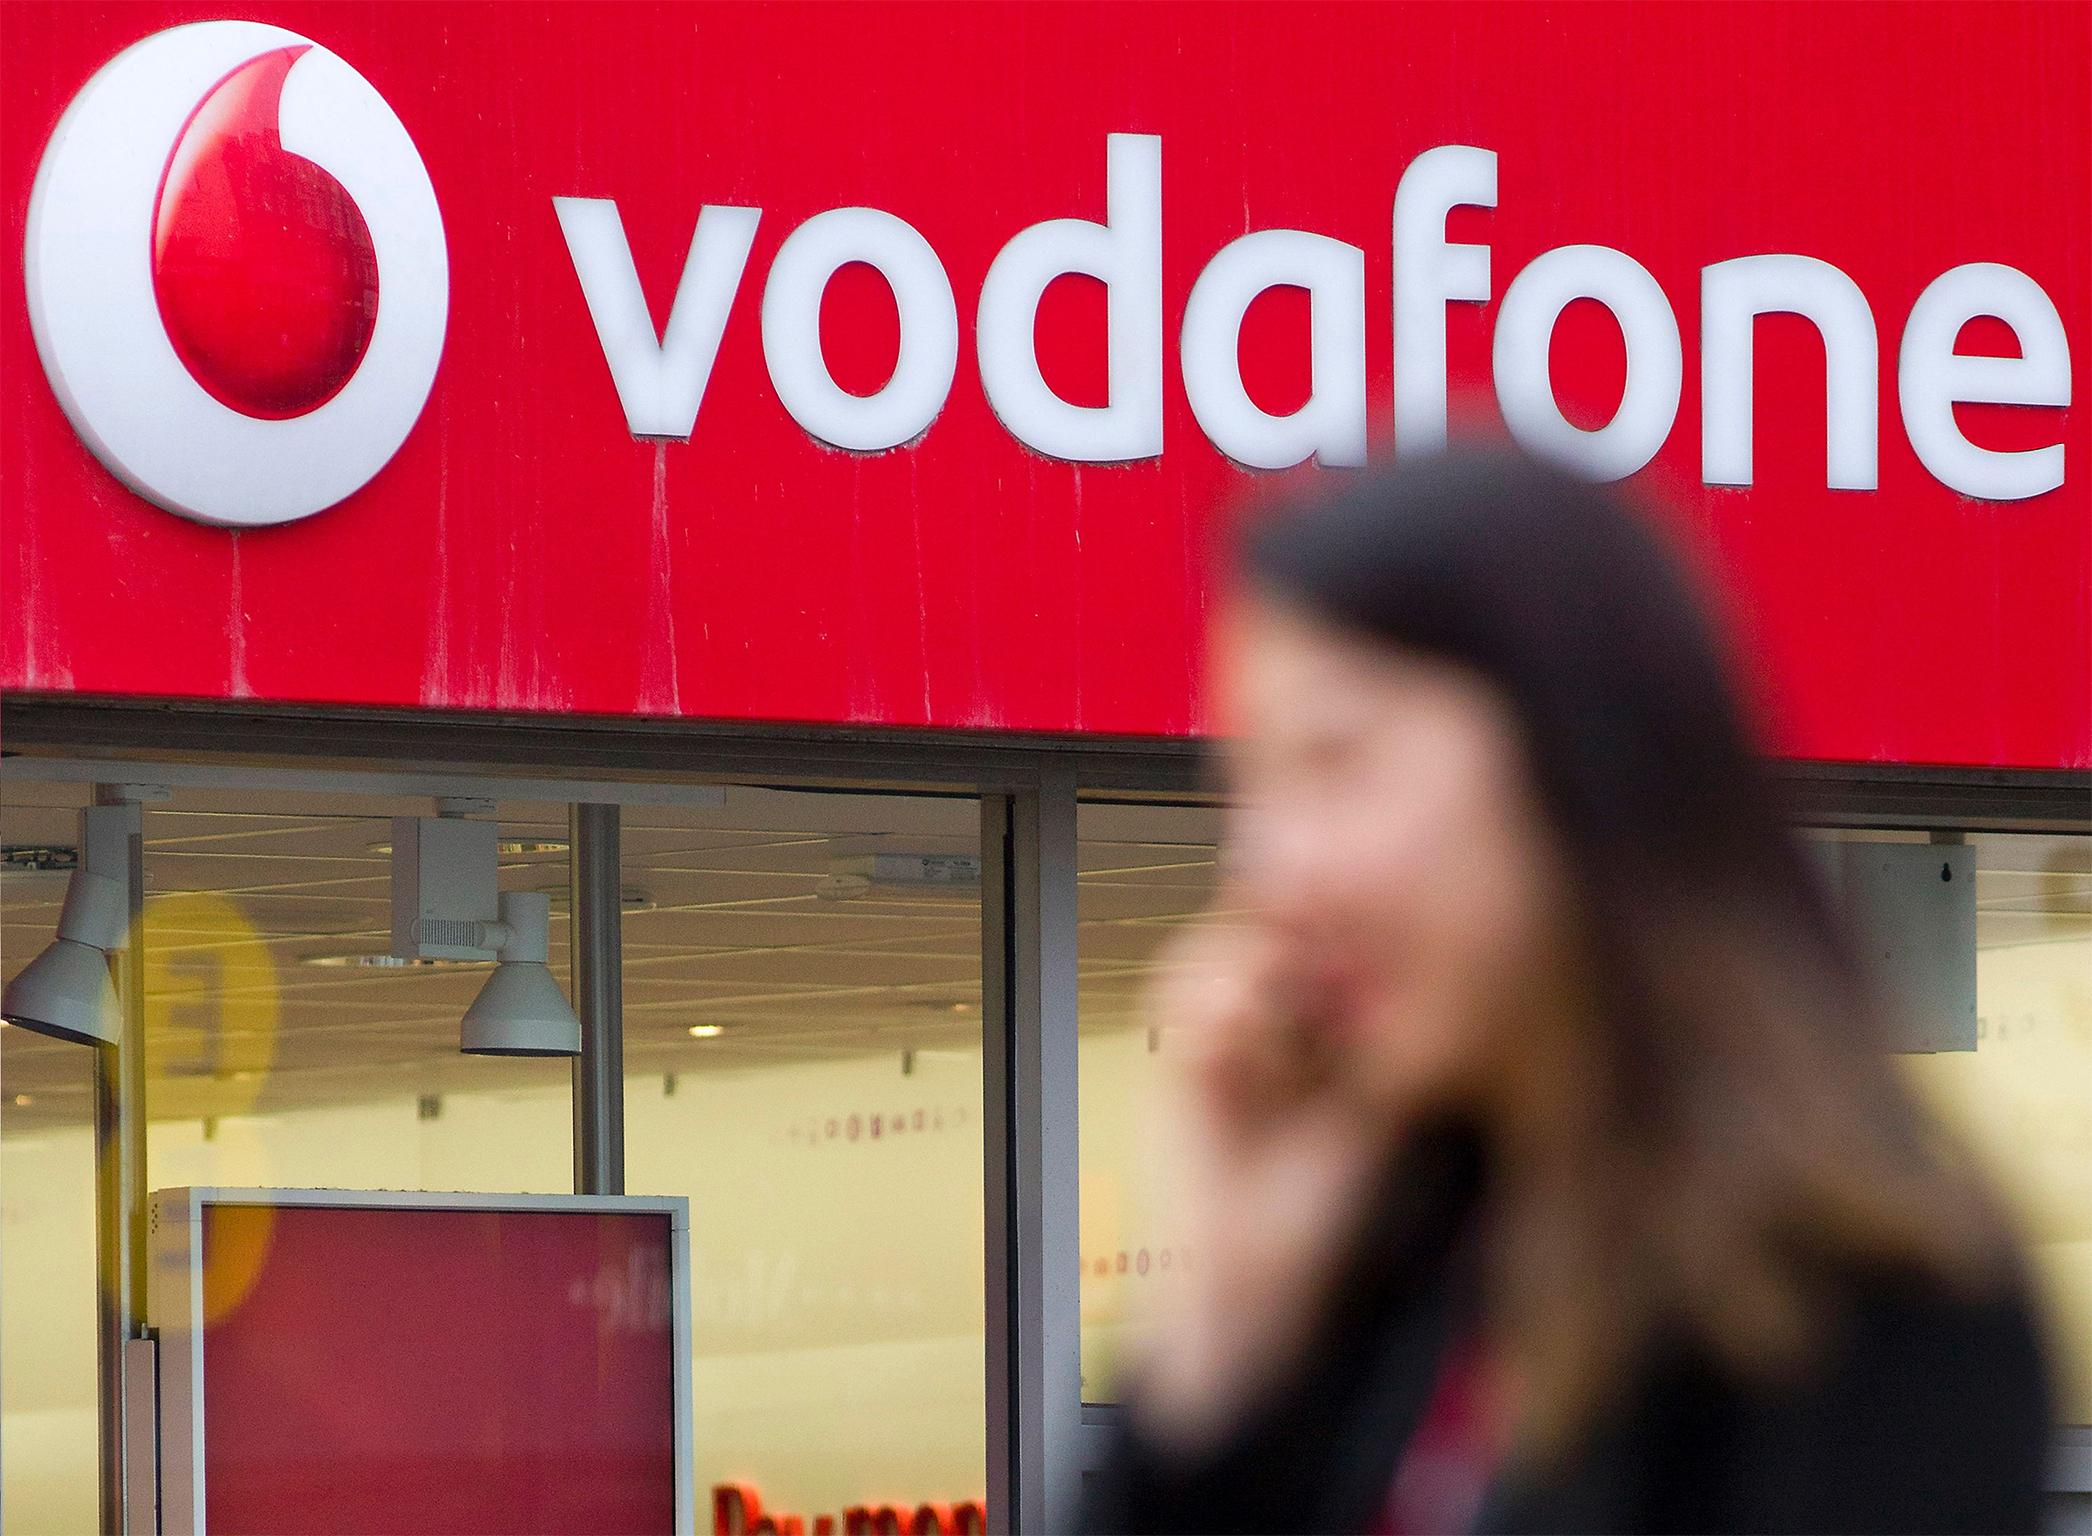 Vodafone ends advertising on all sites that promote hate ...